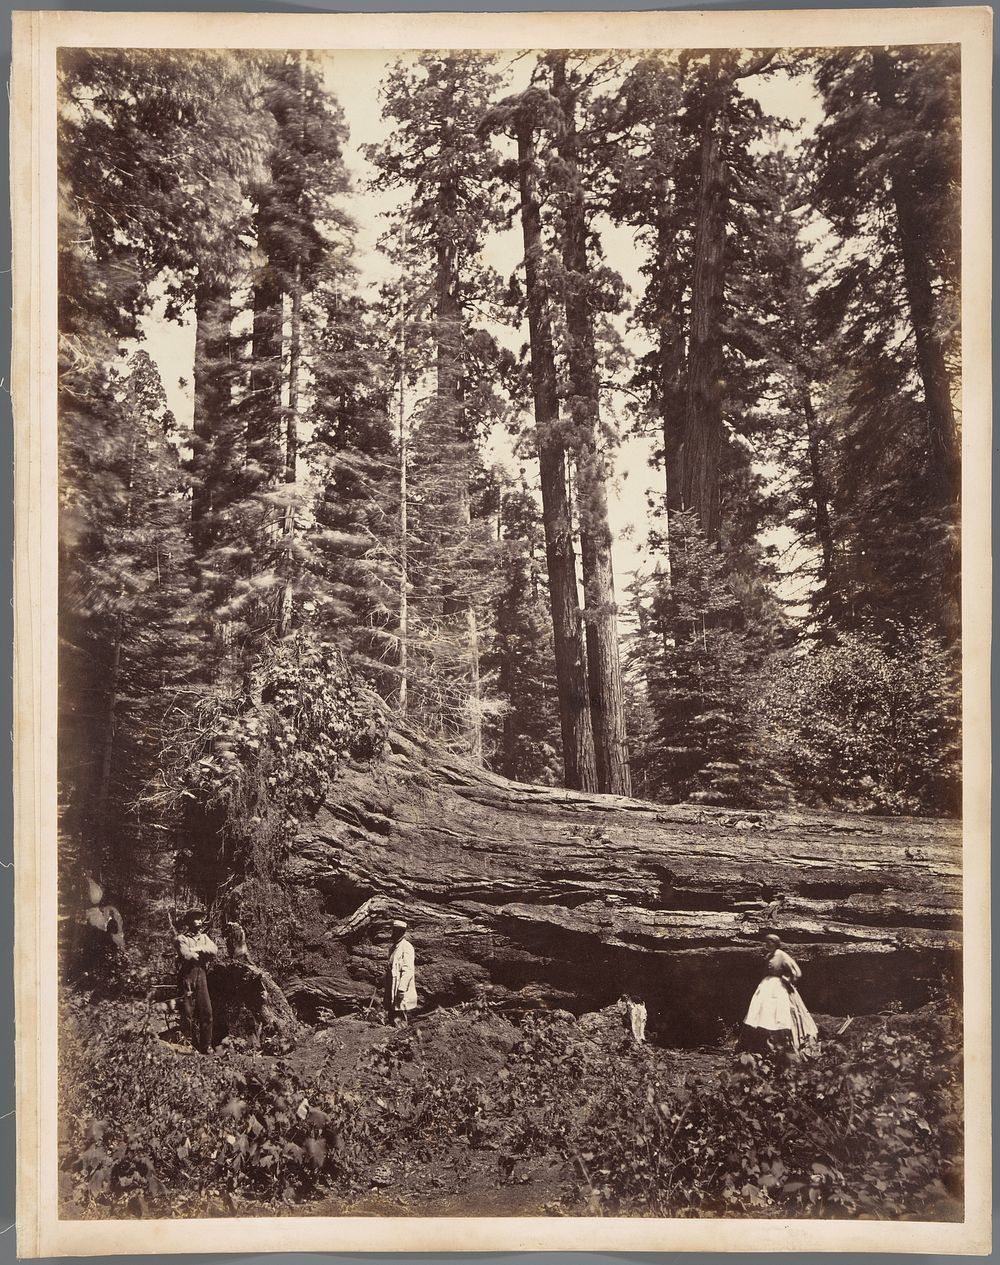 Fallen Tree Hercules 325 feet long, Mammoth Grove, Calaveras County, California (1864) by Charles Leander Weed and Lawrence…